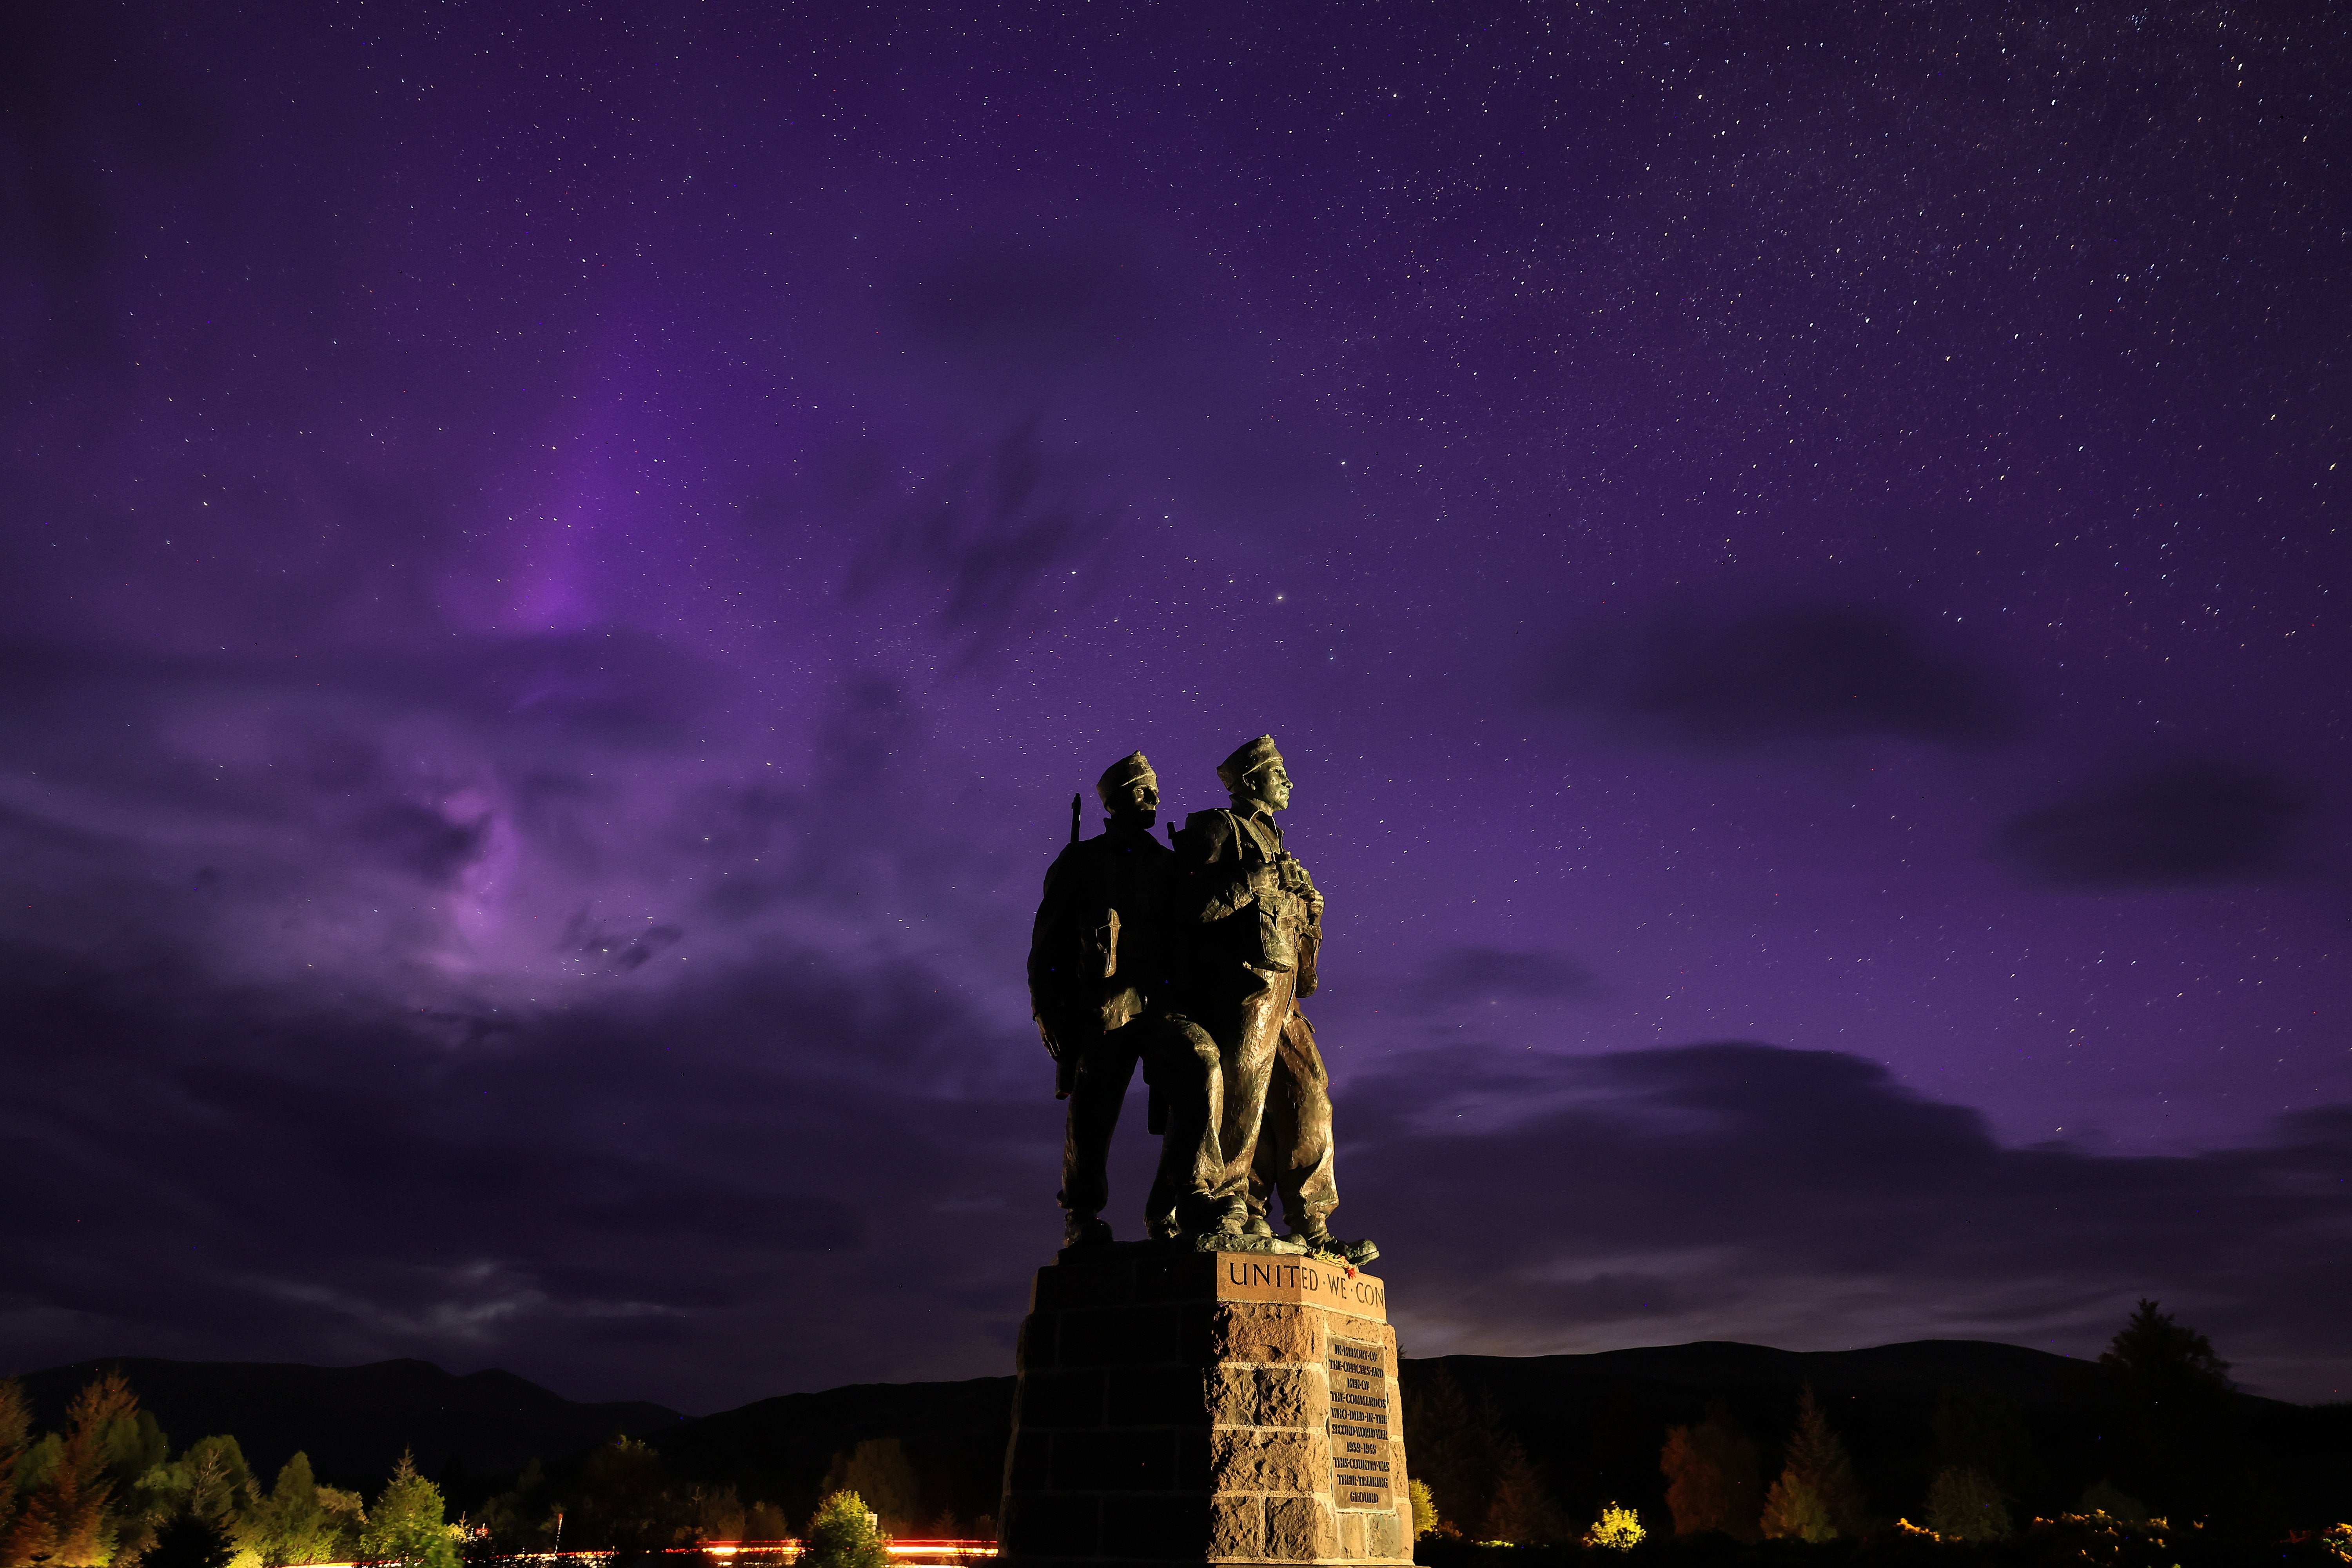 The Commando Memorial in Spean Bridge, Scotland as the aurora borealis, commonly known as the northern lights, are visible in the early hours on Sunday 12 May